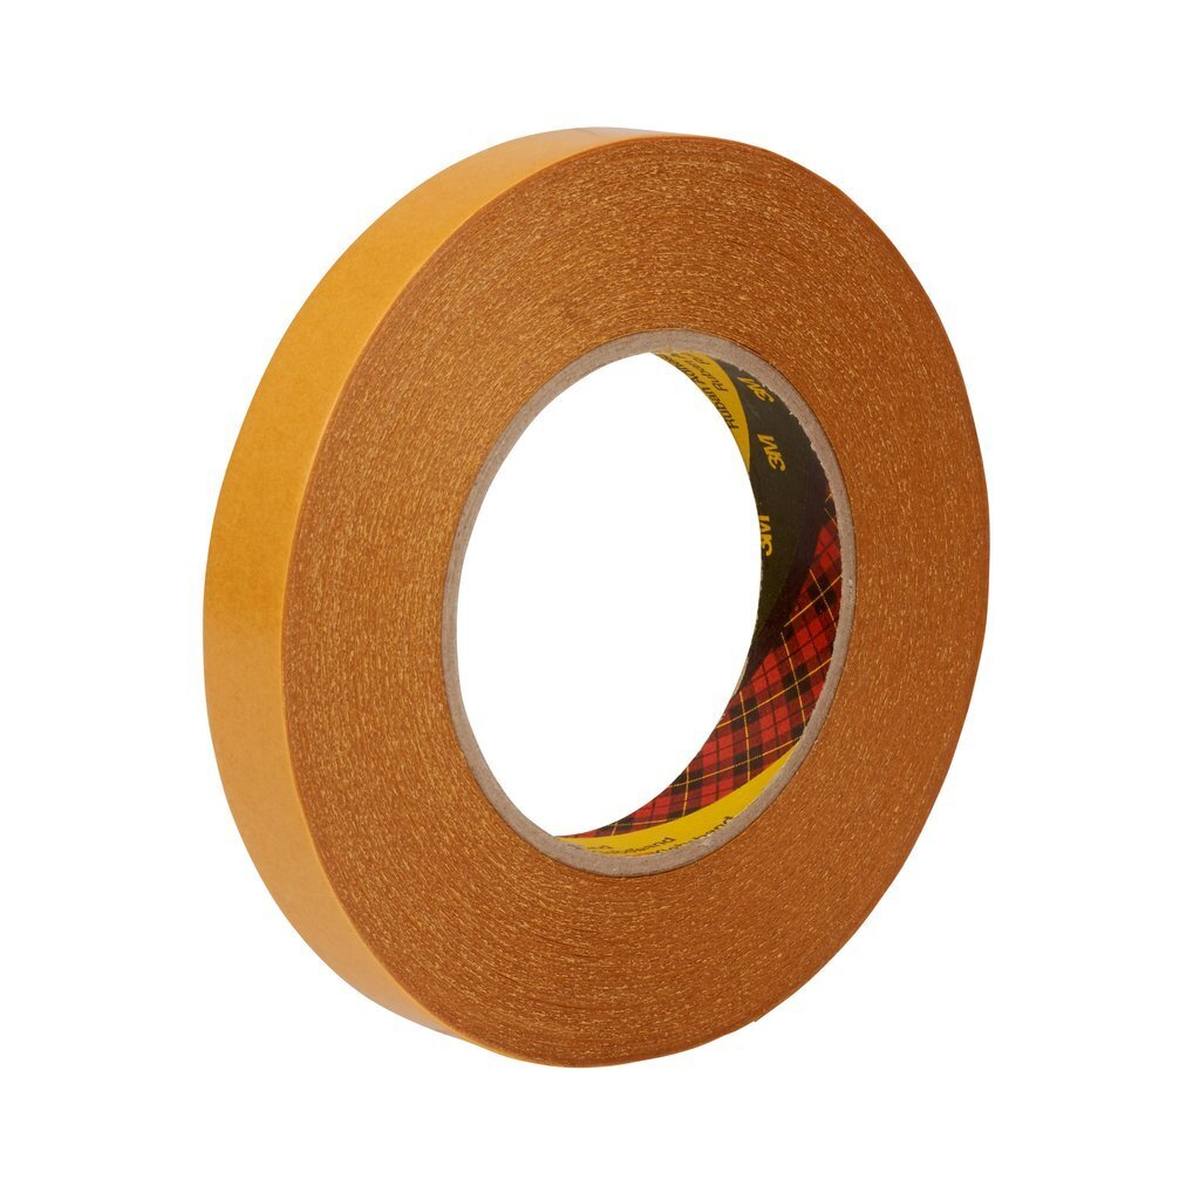 3M Double-sided adhesive tape with non-woven paper backing 9527, cream-colored, 12 mm x 50 m, 0.13 mm